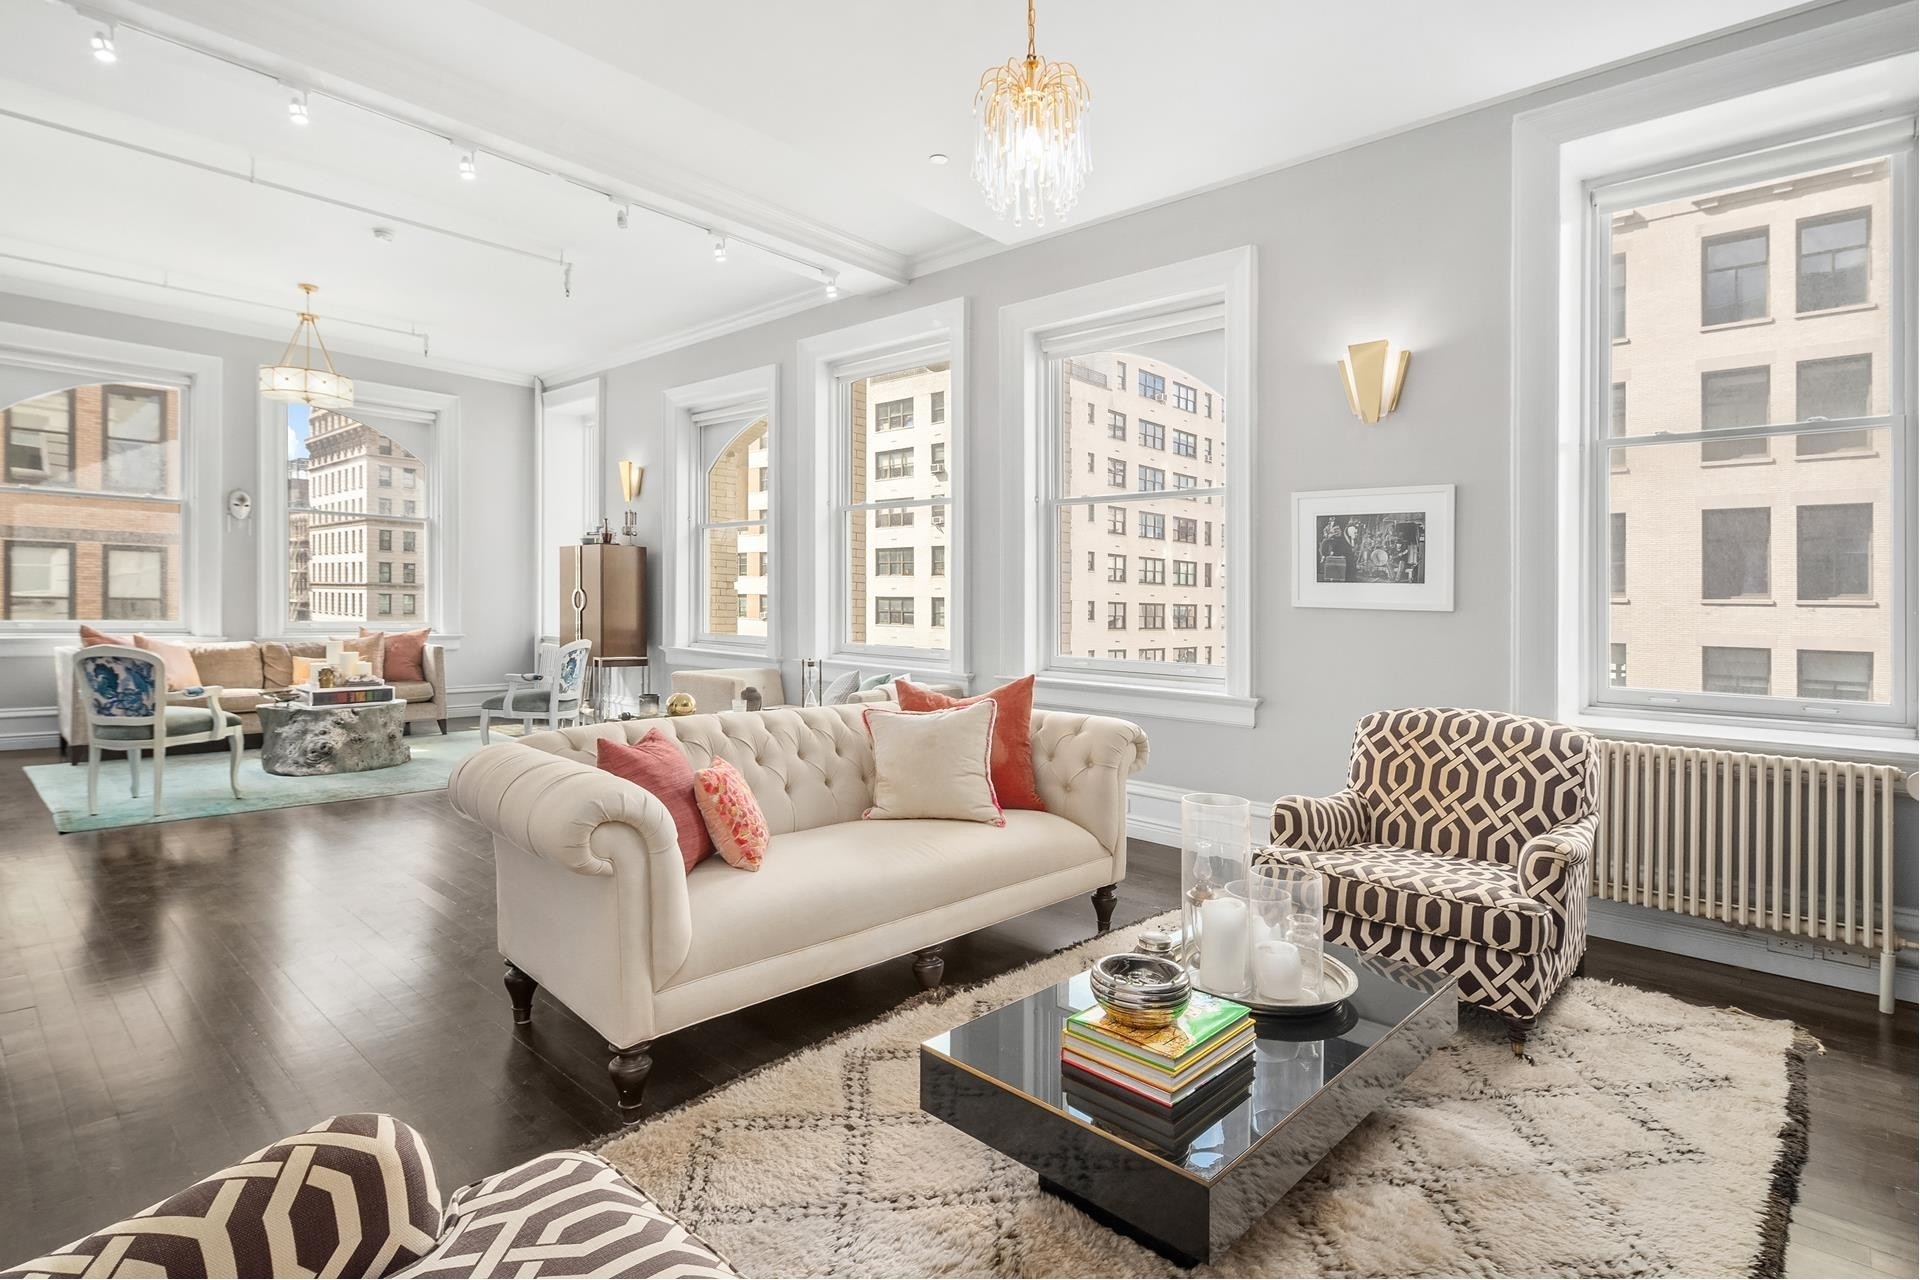 Co-op Properties for Sale at The Kensington, 73 FIFTH AVE , 8A Union Square, New York, NY 10003